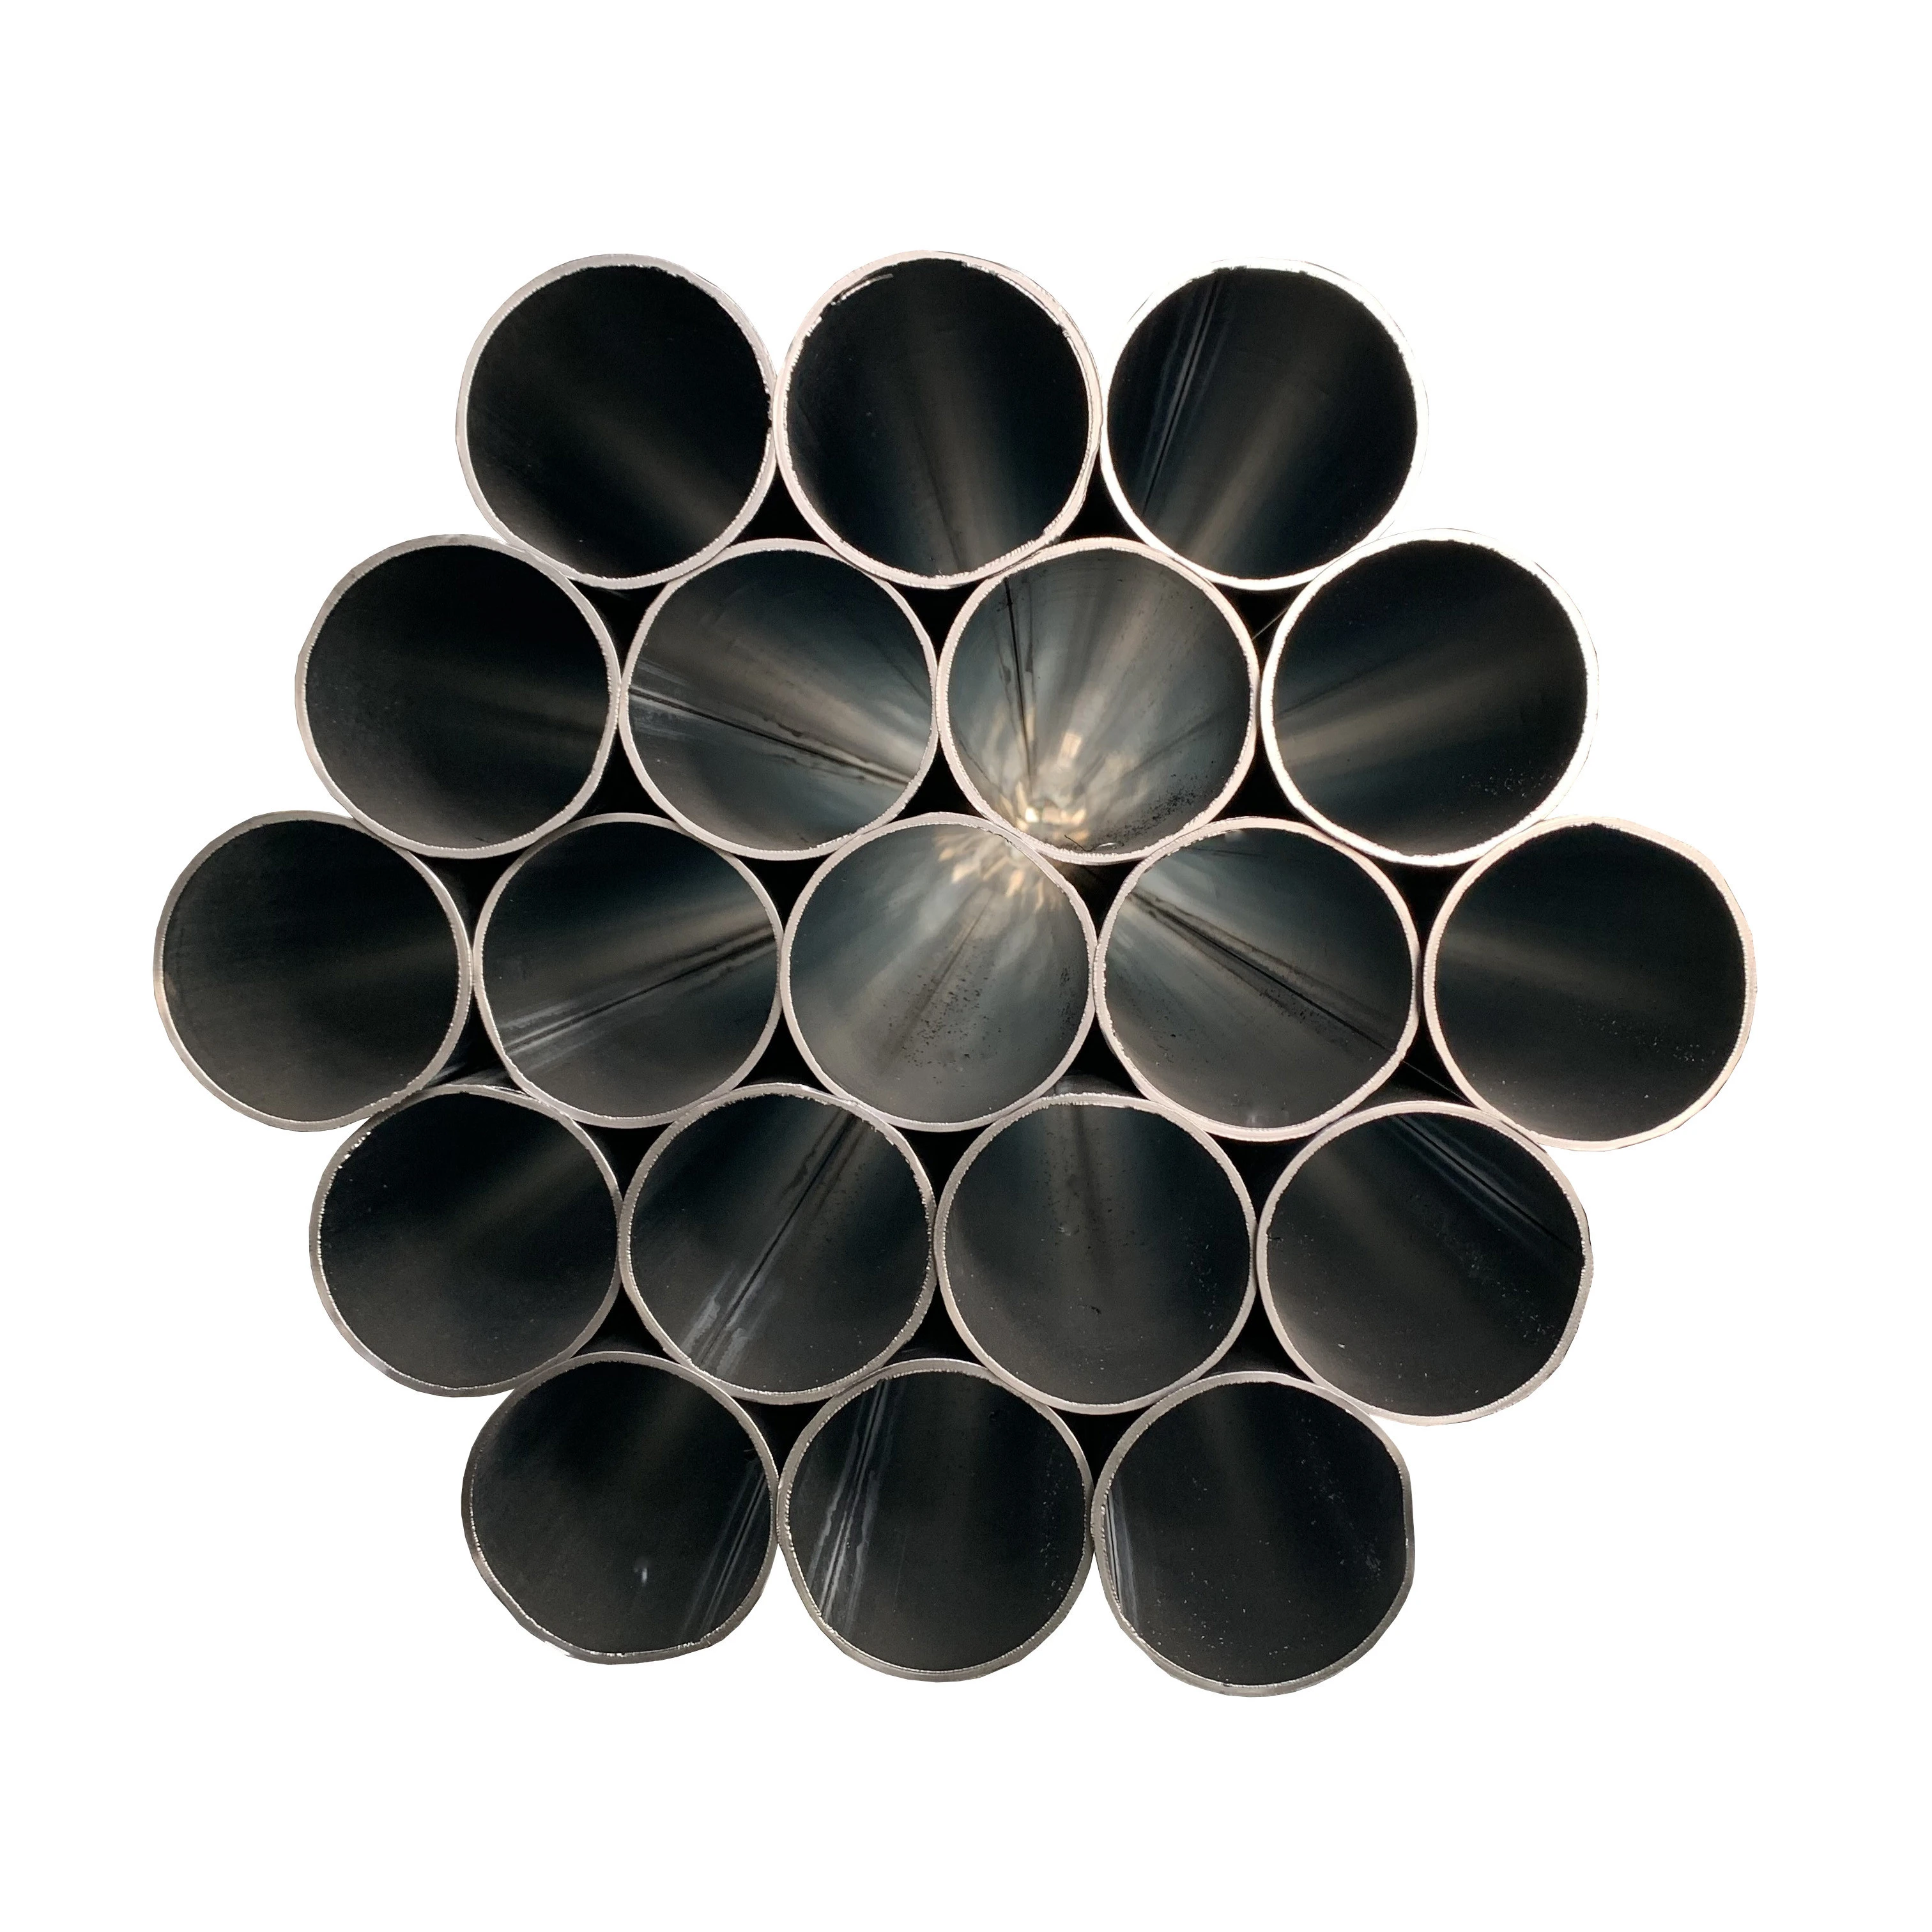 Tianjin standard length Galvanized Iron Pipe for building materials